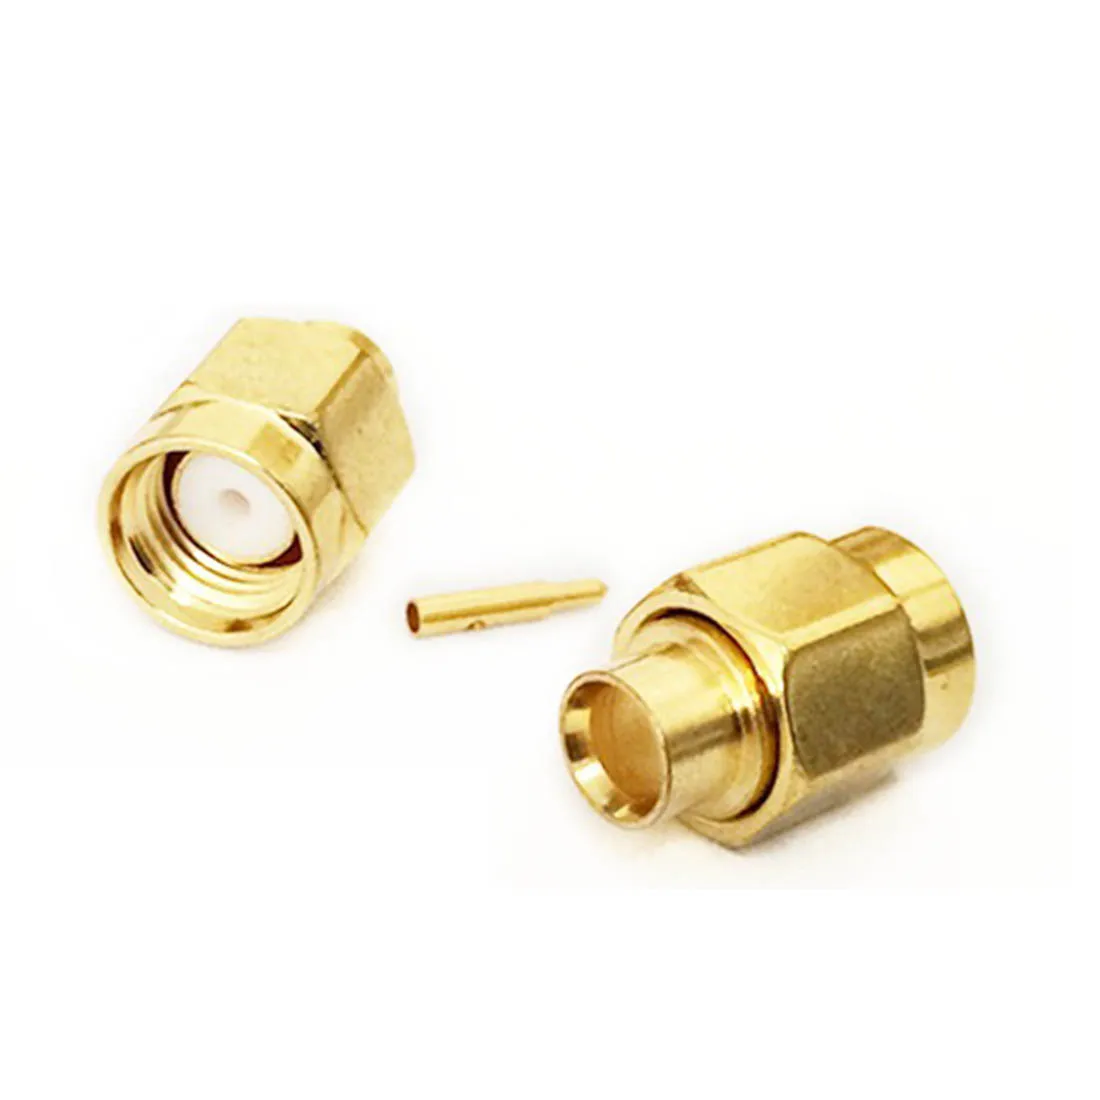 

1pc SMA Male Plug RF Coax Modem Convertor Connector Solder Cable RG402 141" Straight Goldplated New Wholesale